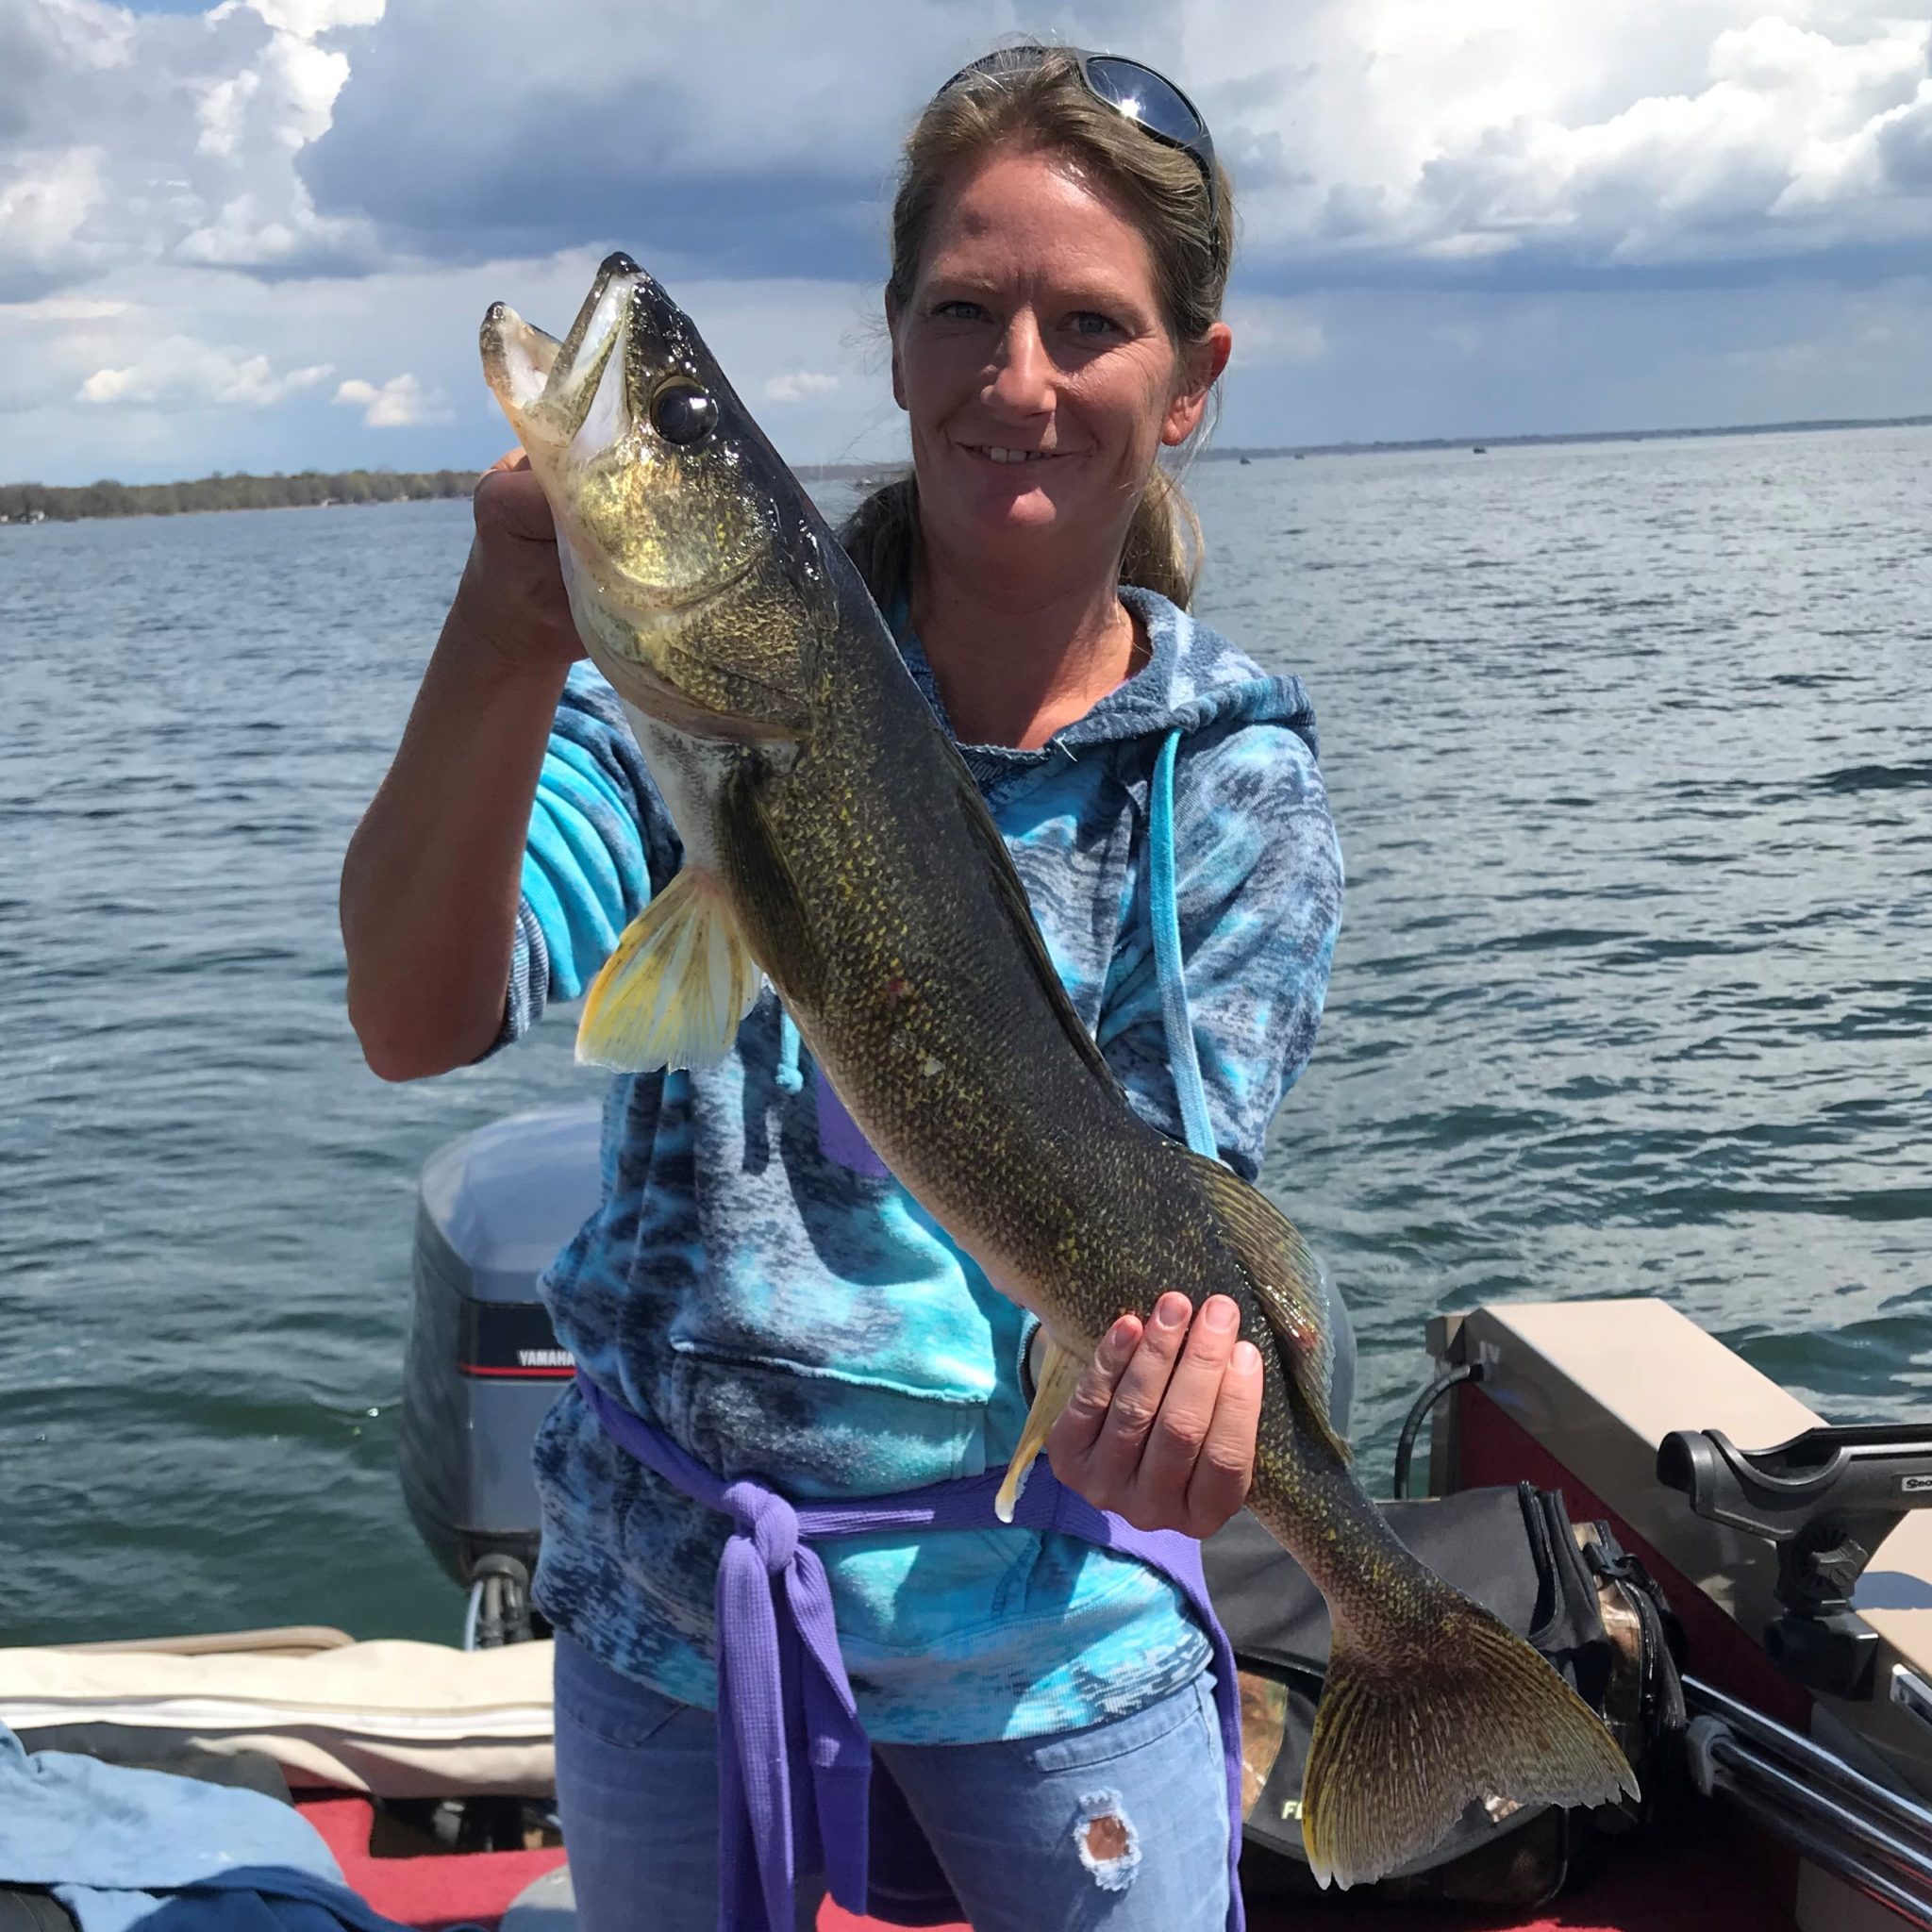 Mille Lacs Walleye Catch During 2021 Minnesota Fishing Opener